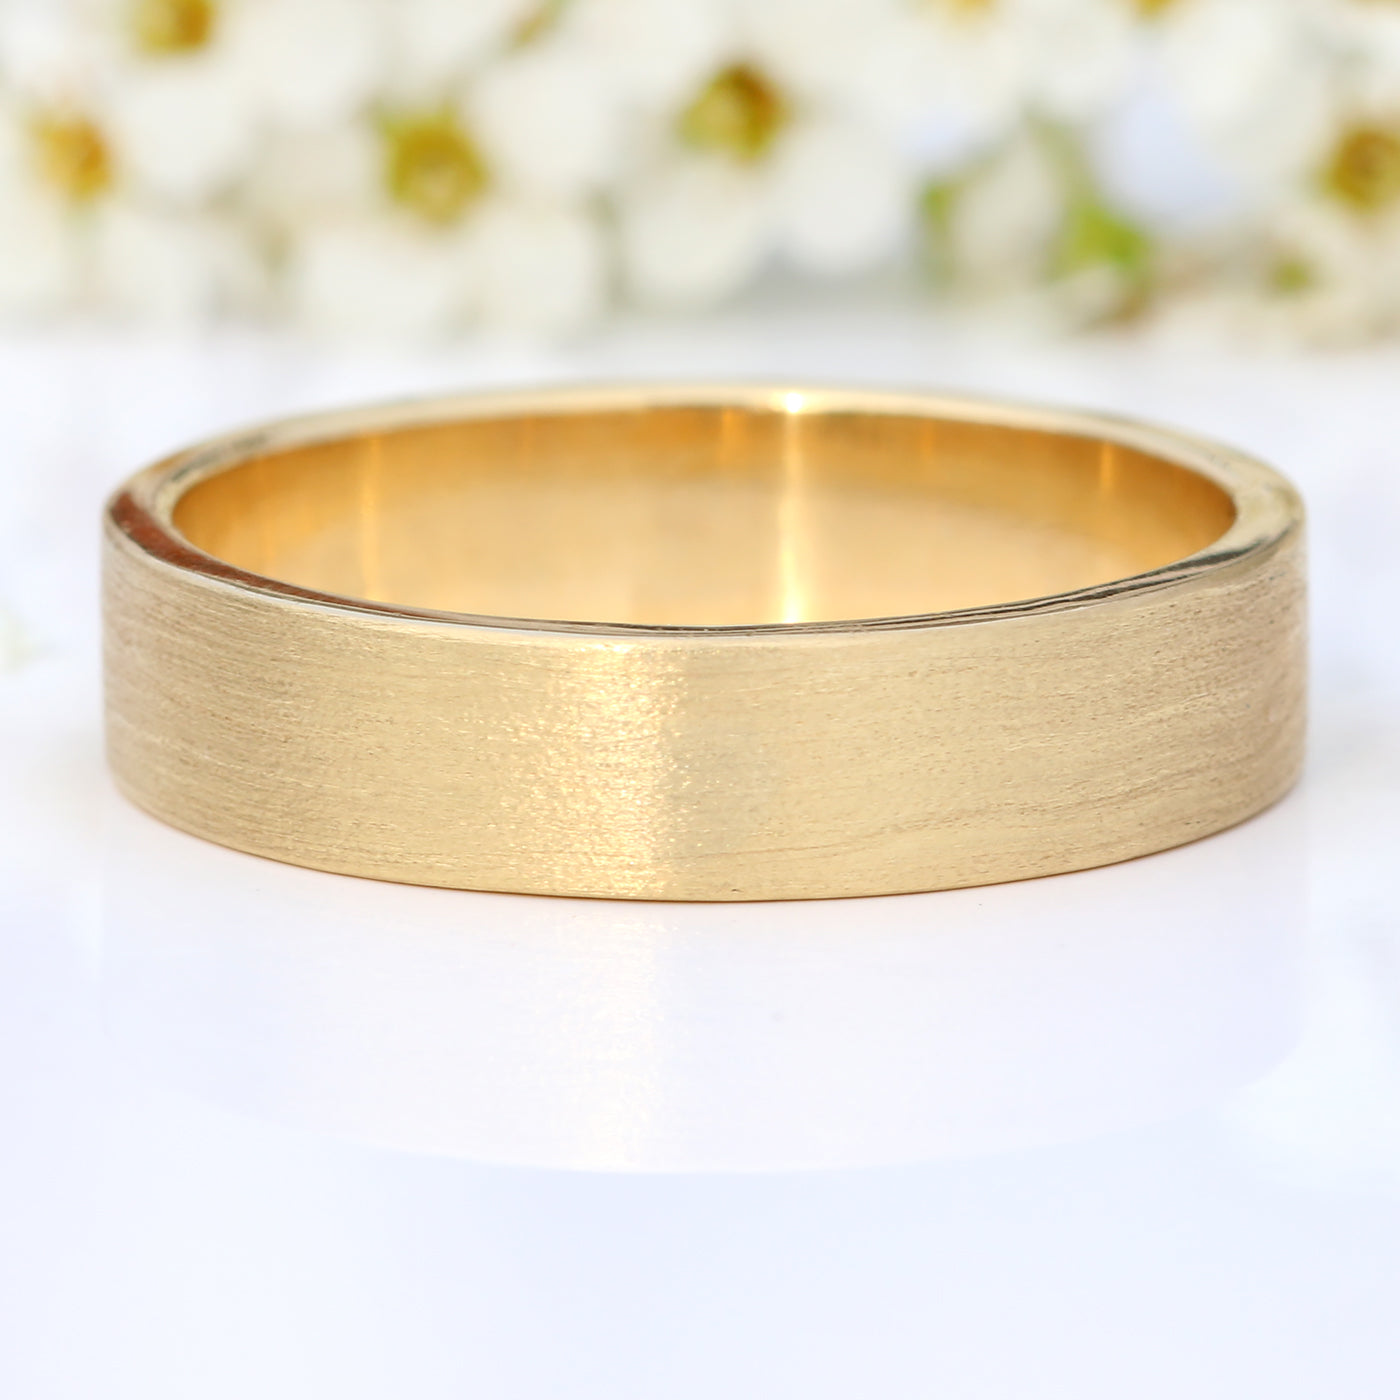 5mm flat wedding ring in 18ct gold